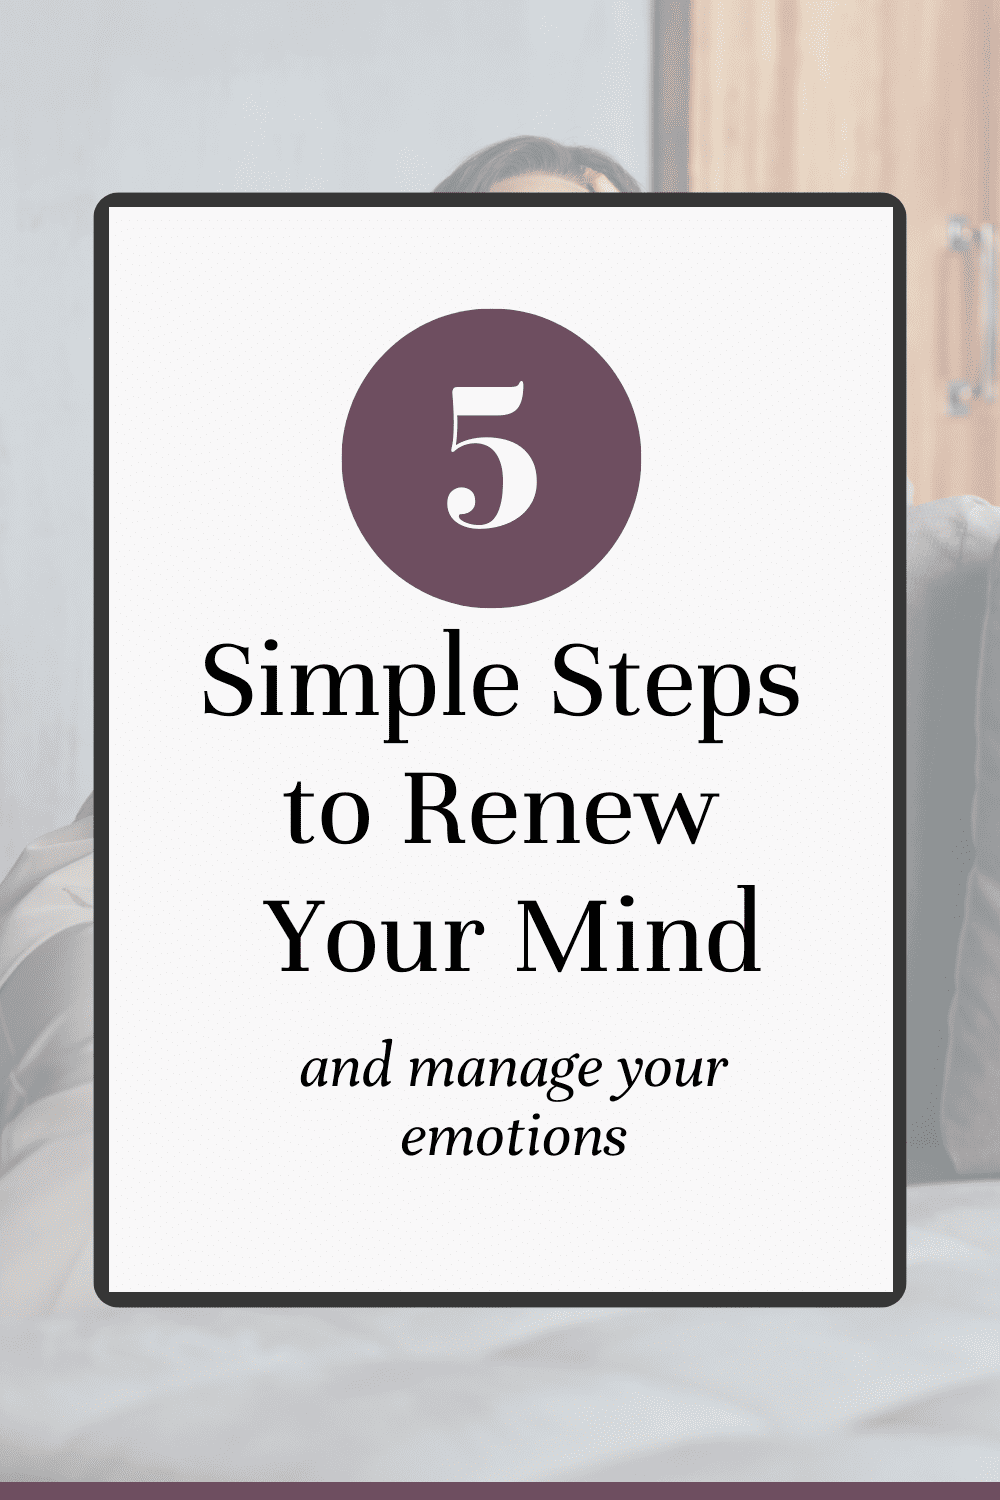 Are you ready learn how to manage your emotions and control negative thoughts? Learn the 5 steps to renewing your mind and taking your thoughts captive so you can change your Christian mindset and find peace during hard times.